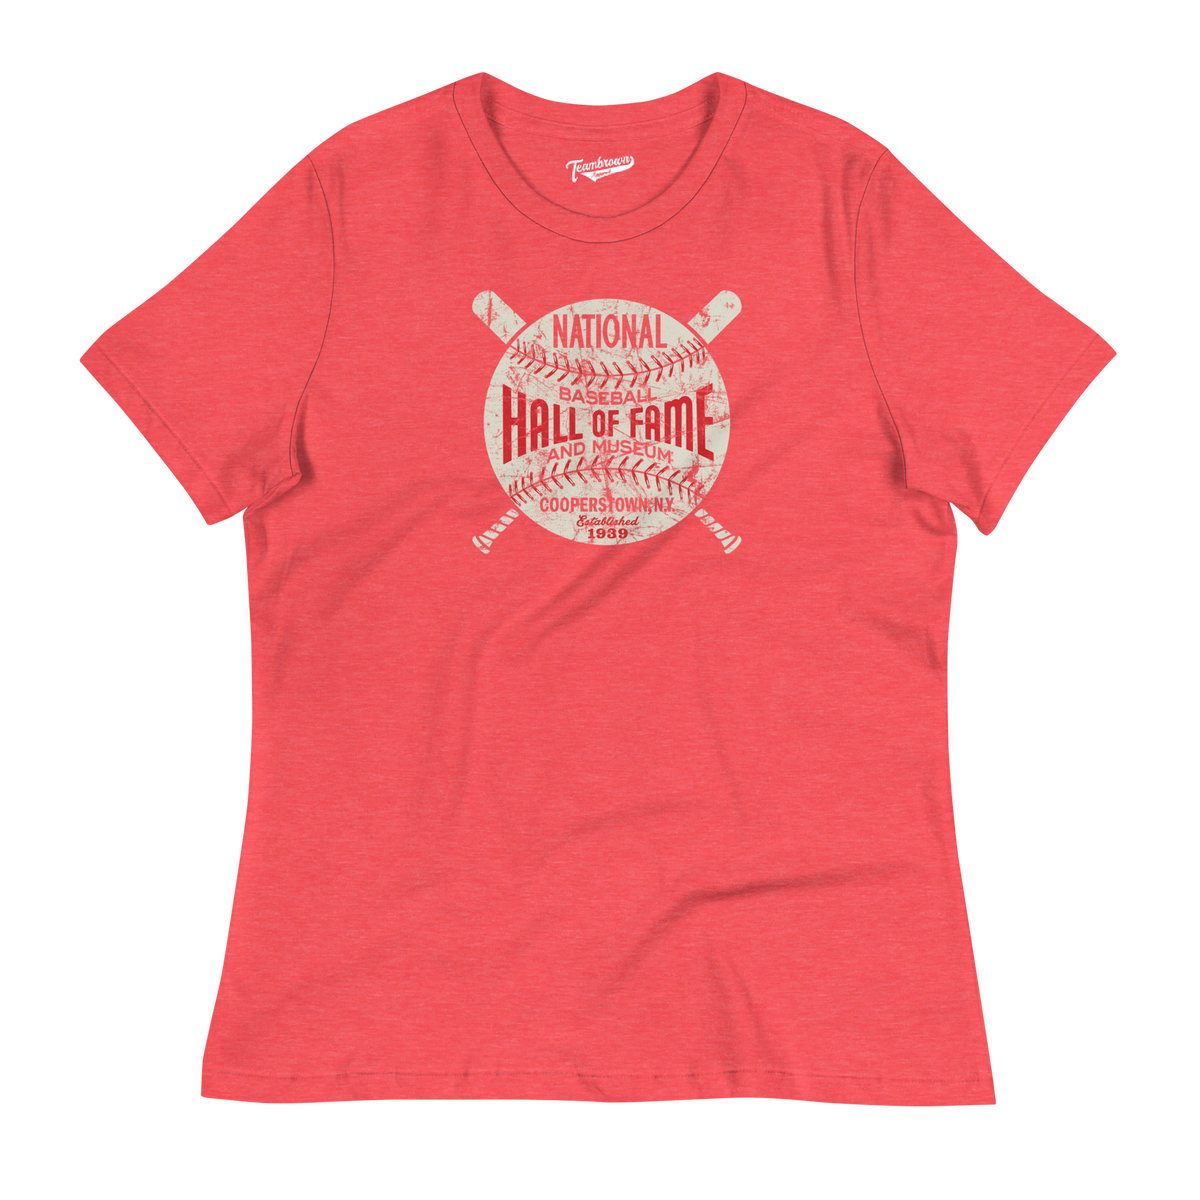 Baseball Hall of Fame - Circle Logo - Women's Relaxed Fit T-Shirt | Officially Licensed - National Baseball Hall of Fame and Museum